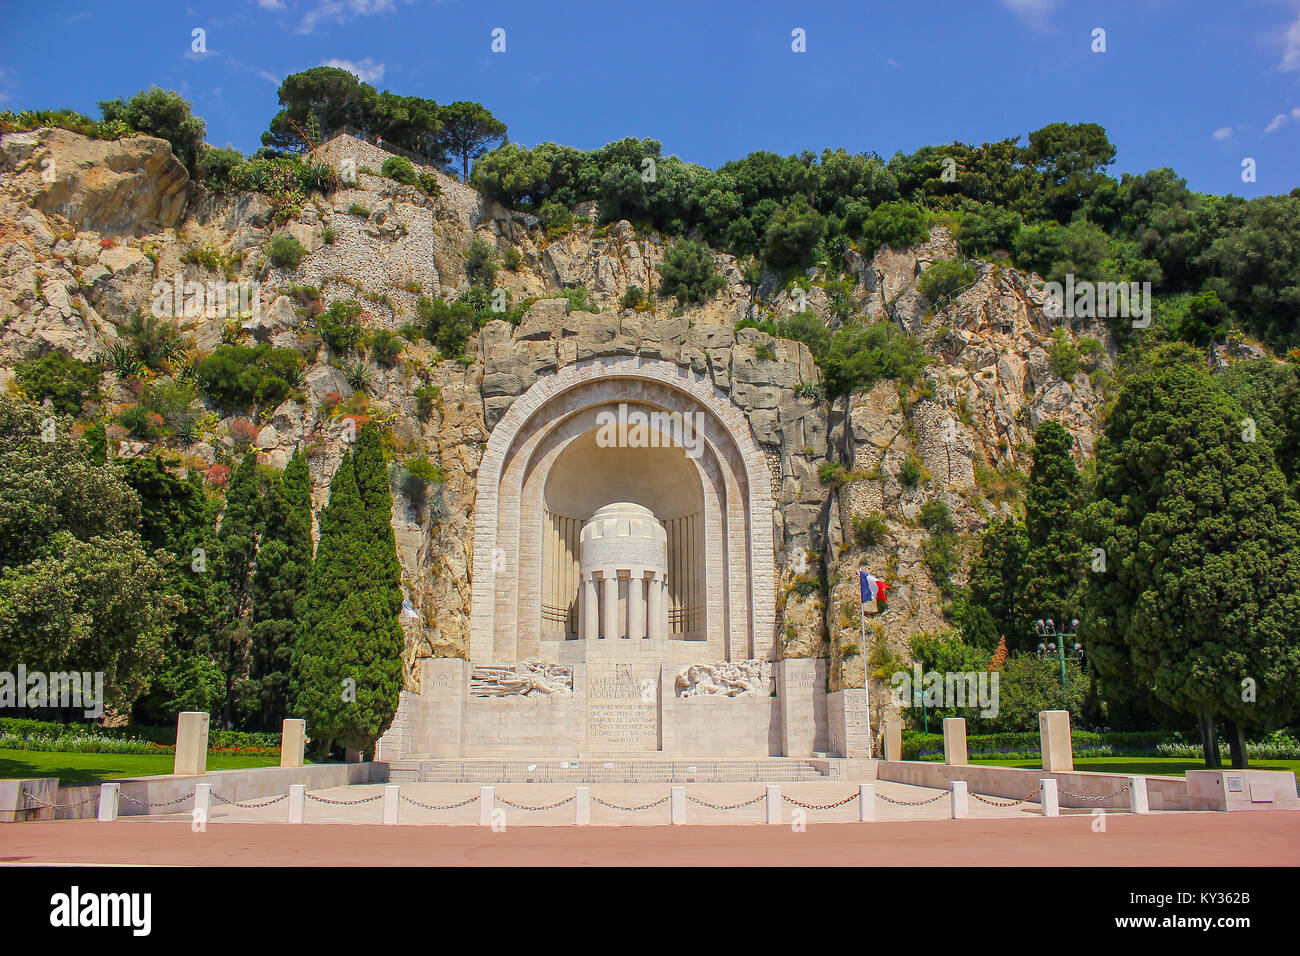 Memorial monument for the dead soldiers in Nice, France Stock Photo